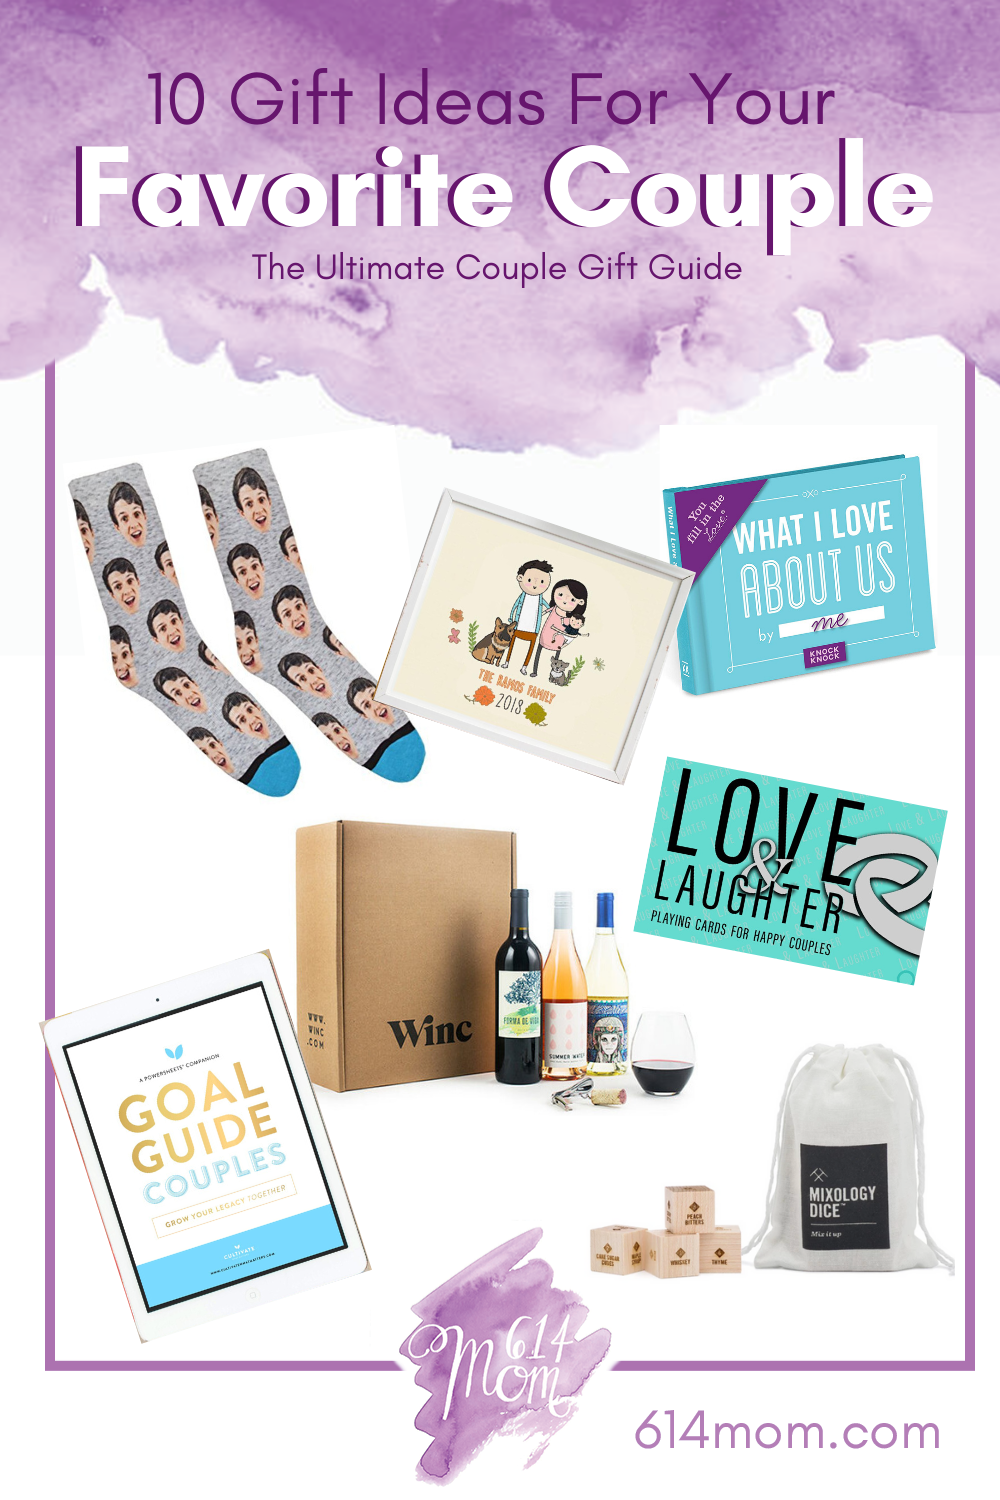 10 Gift Ideas For Your Favorite Couple